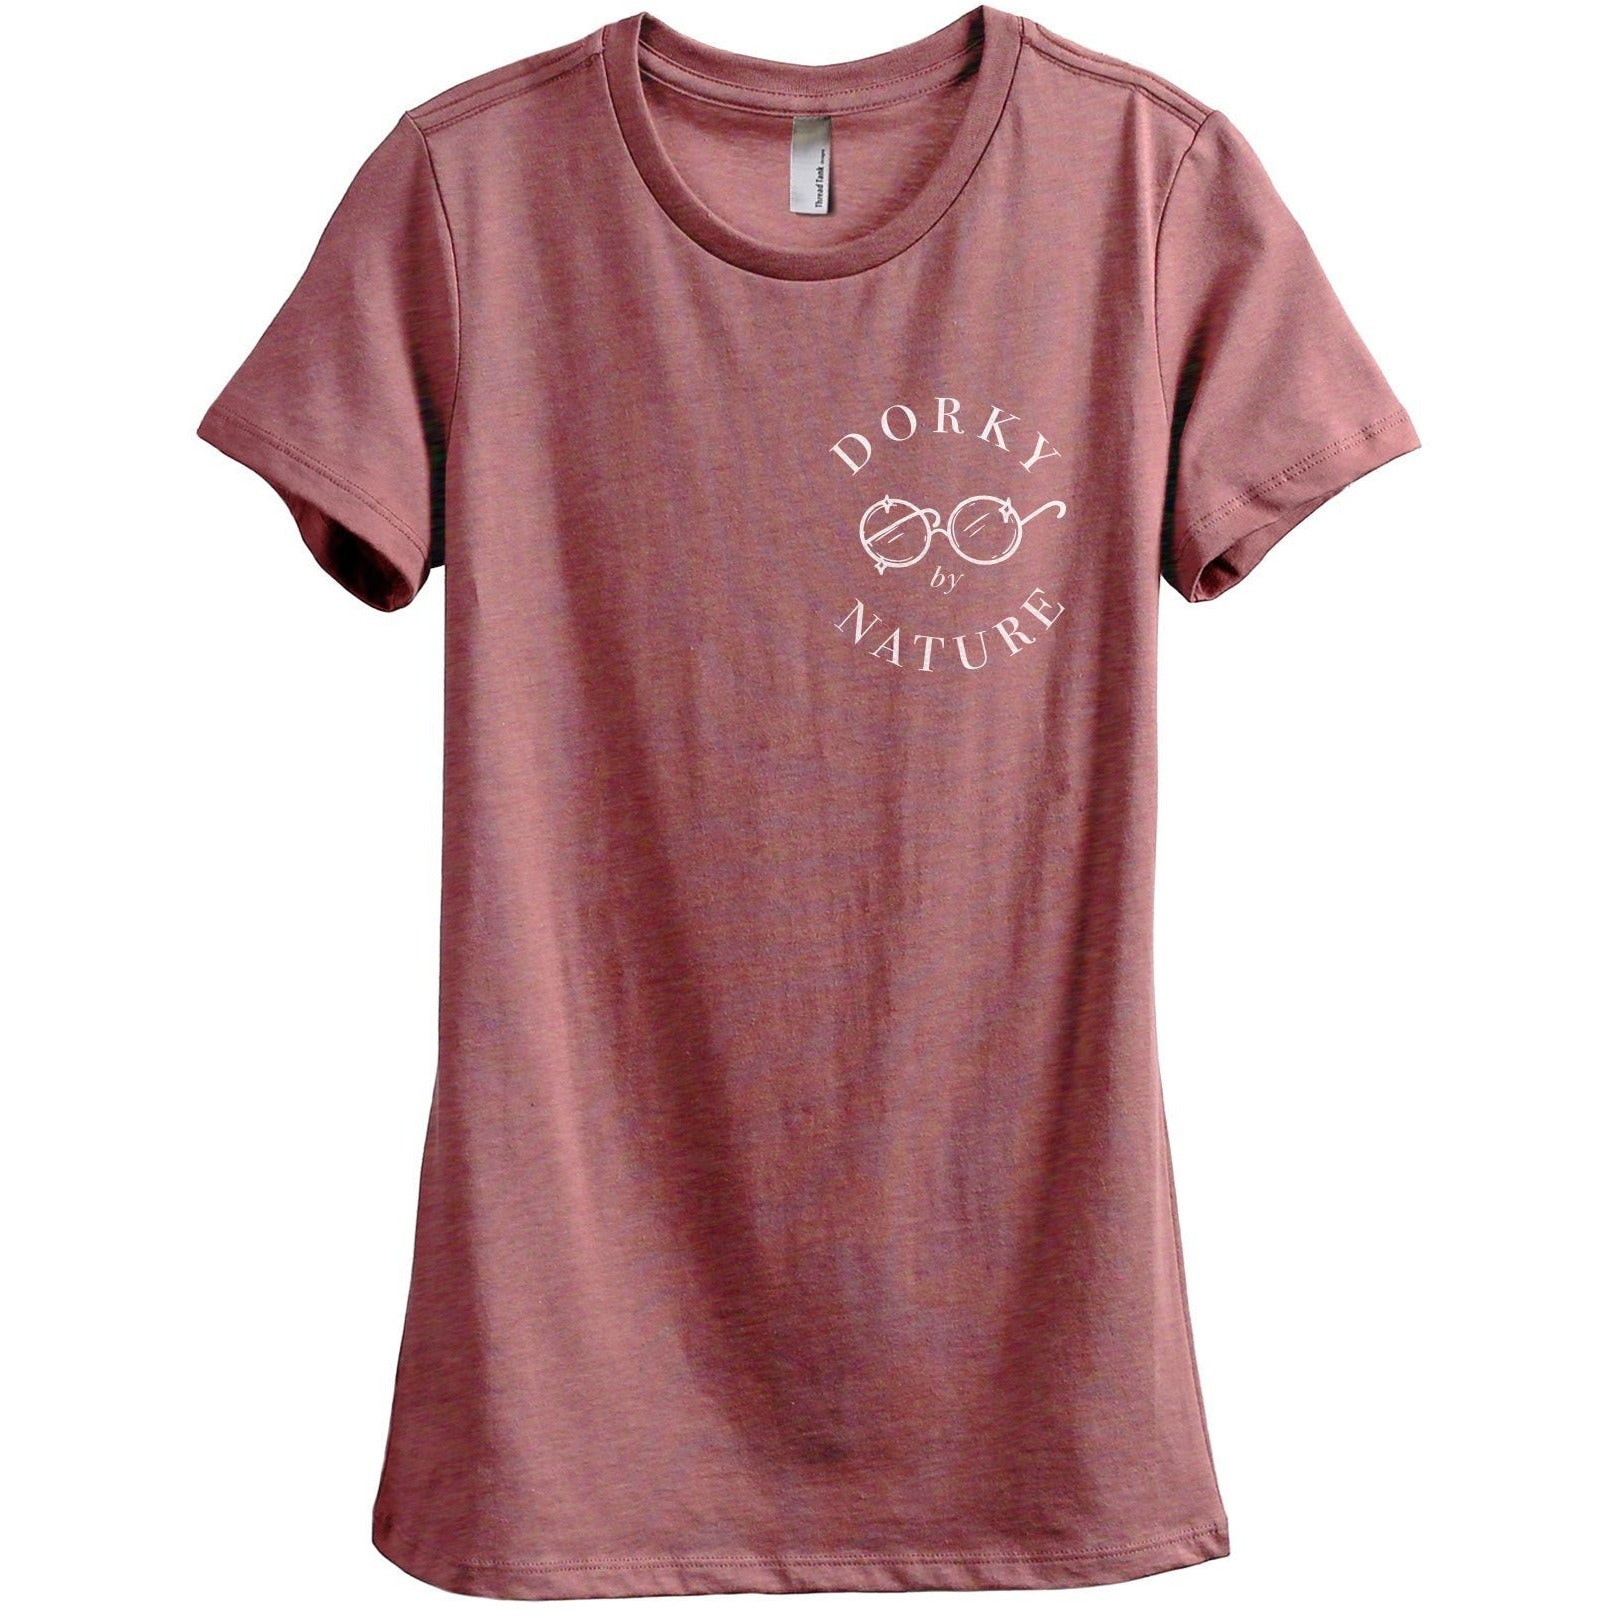 Dorky By Nature Women's Relaxed Crewneck T-Shirt Top Tee Heather Rouge